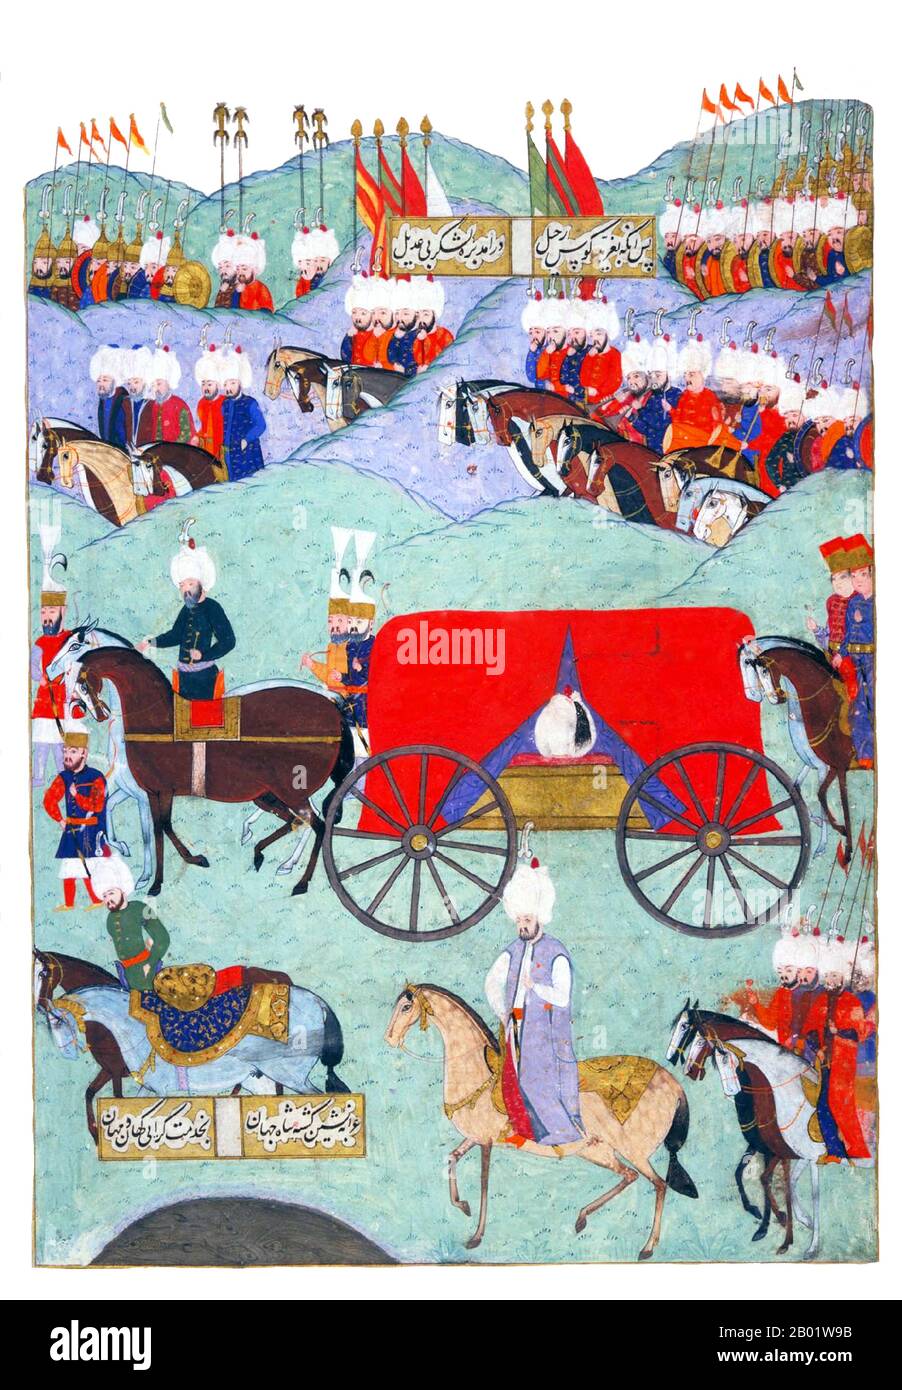 Turkey: The funeral of Sultan Suleyman the Magnificent (6 November 1494 - 6 September 1566). Ottoman miniature painting (left panel) by Matrakci Nasuh, 1579.  Sultan Suleyman/Suleiman I (r. 1520-1566), also known as 'Suleyman the Magnificent' and 'Suleyman the Lawmaker', was the 10th and longest reigning sultan of the Ottoman empire. He personally led his armies to conquer Transylvania, the Caspian, much of the Middle East and the Maghreb.  Suleyman introduced sweeping reforms in Turkish legislation, education, taxation and criminal law, and was highly respected as a poet and a goldsmith. Stock Photo